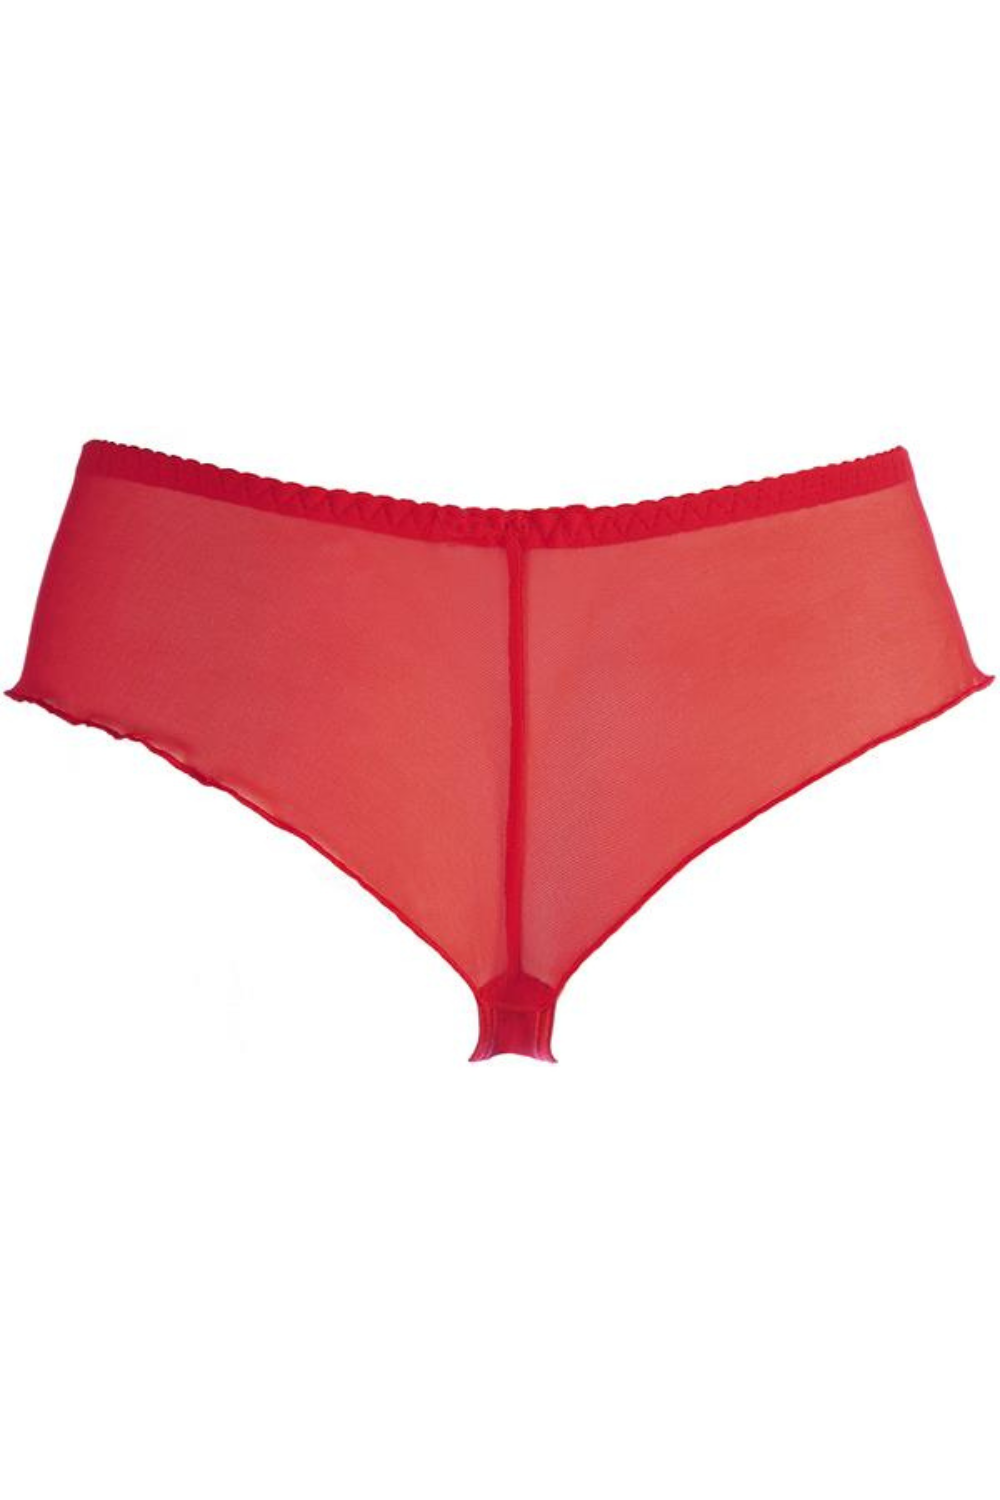 Ayana Floral Embroidered Brazilian Thong - Red